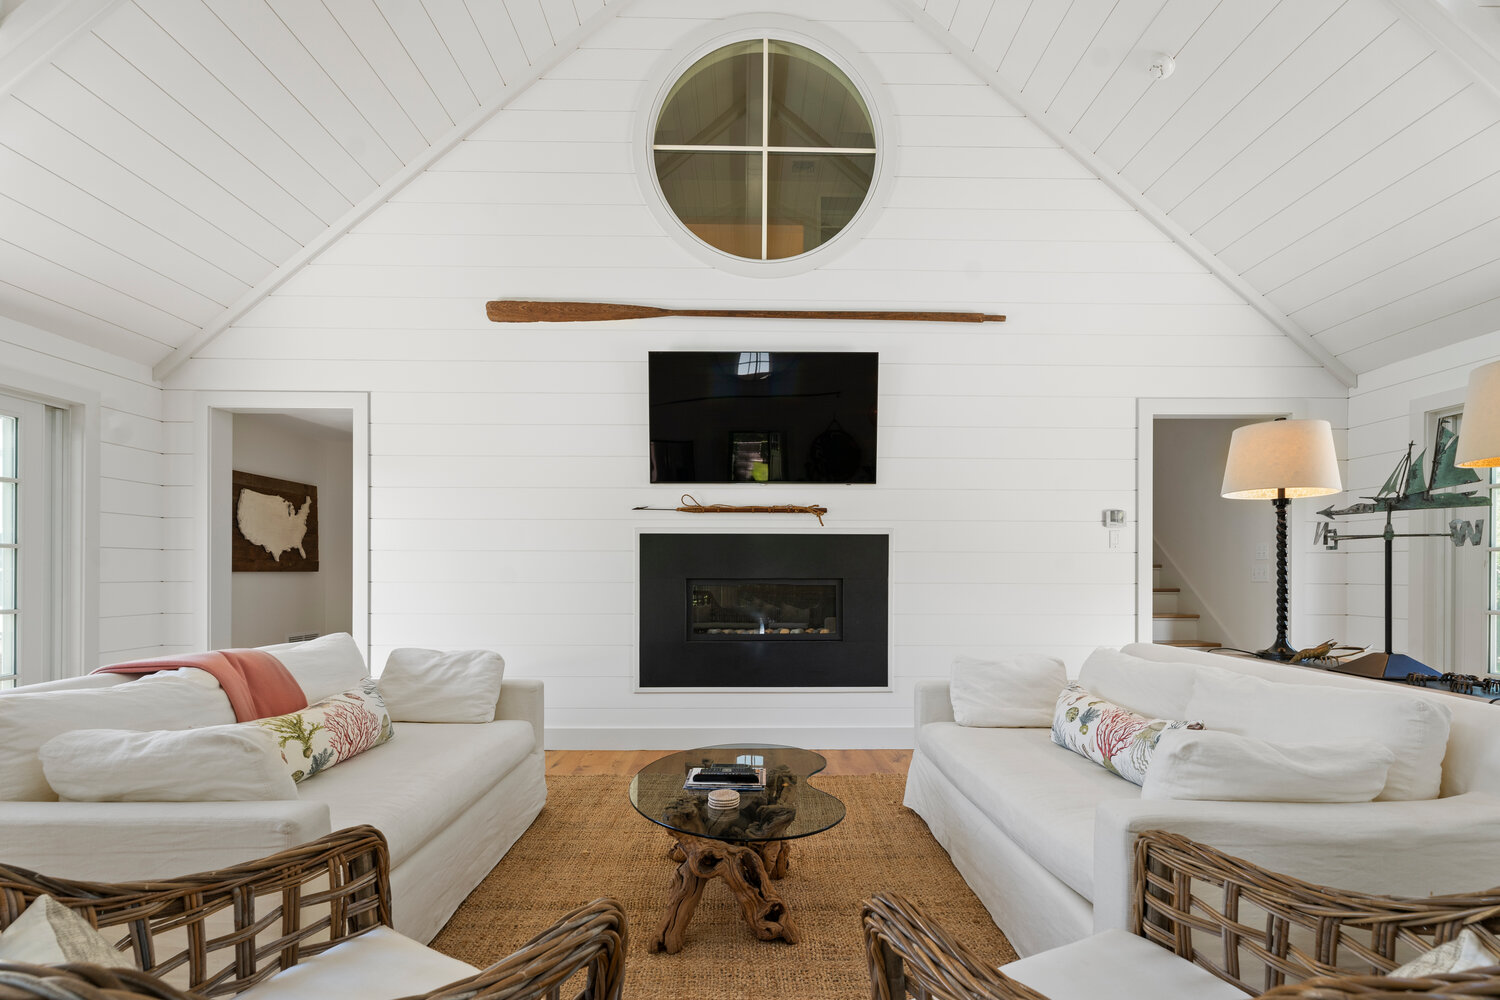 The guest house living room has a vaulted ceiling, shiplap walls and a gas fireplace.